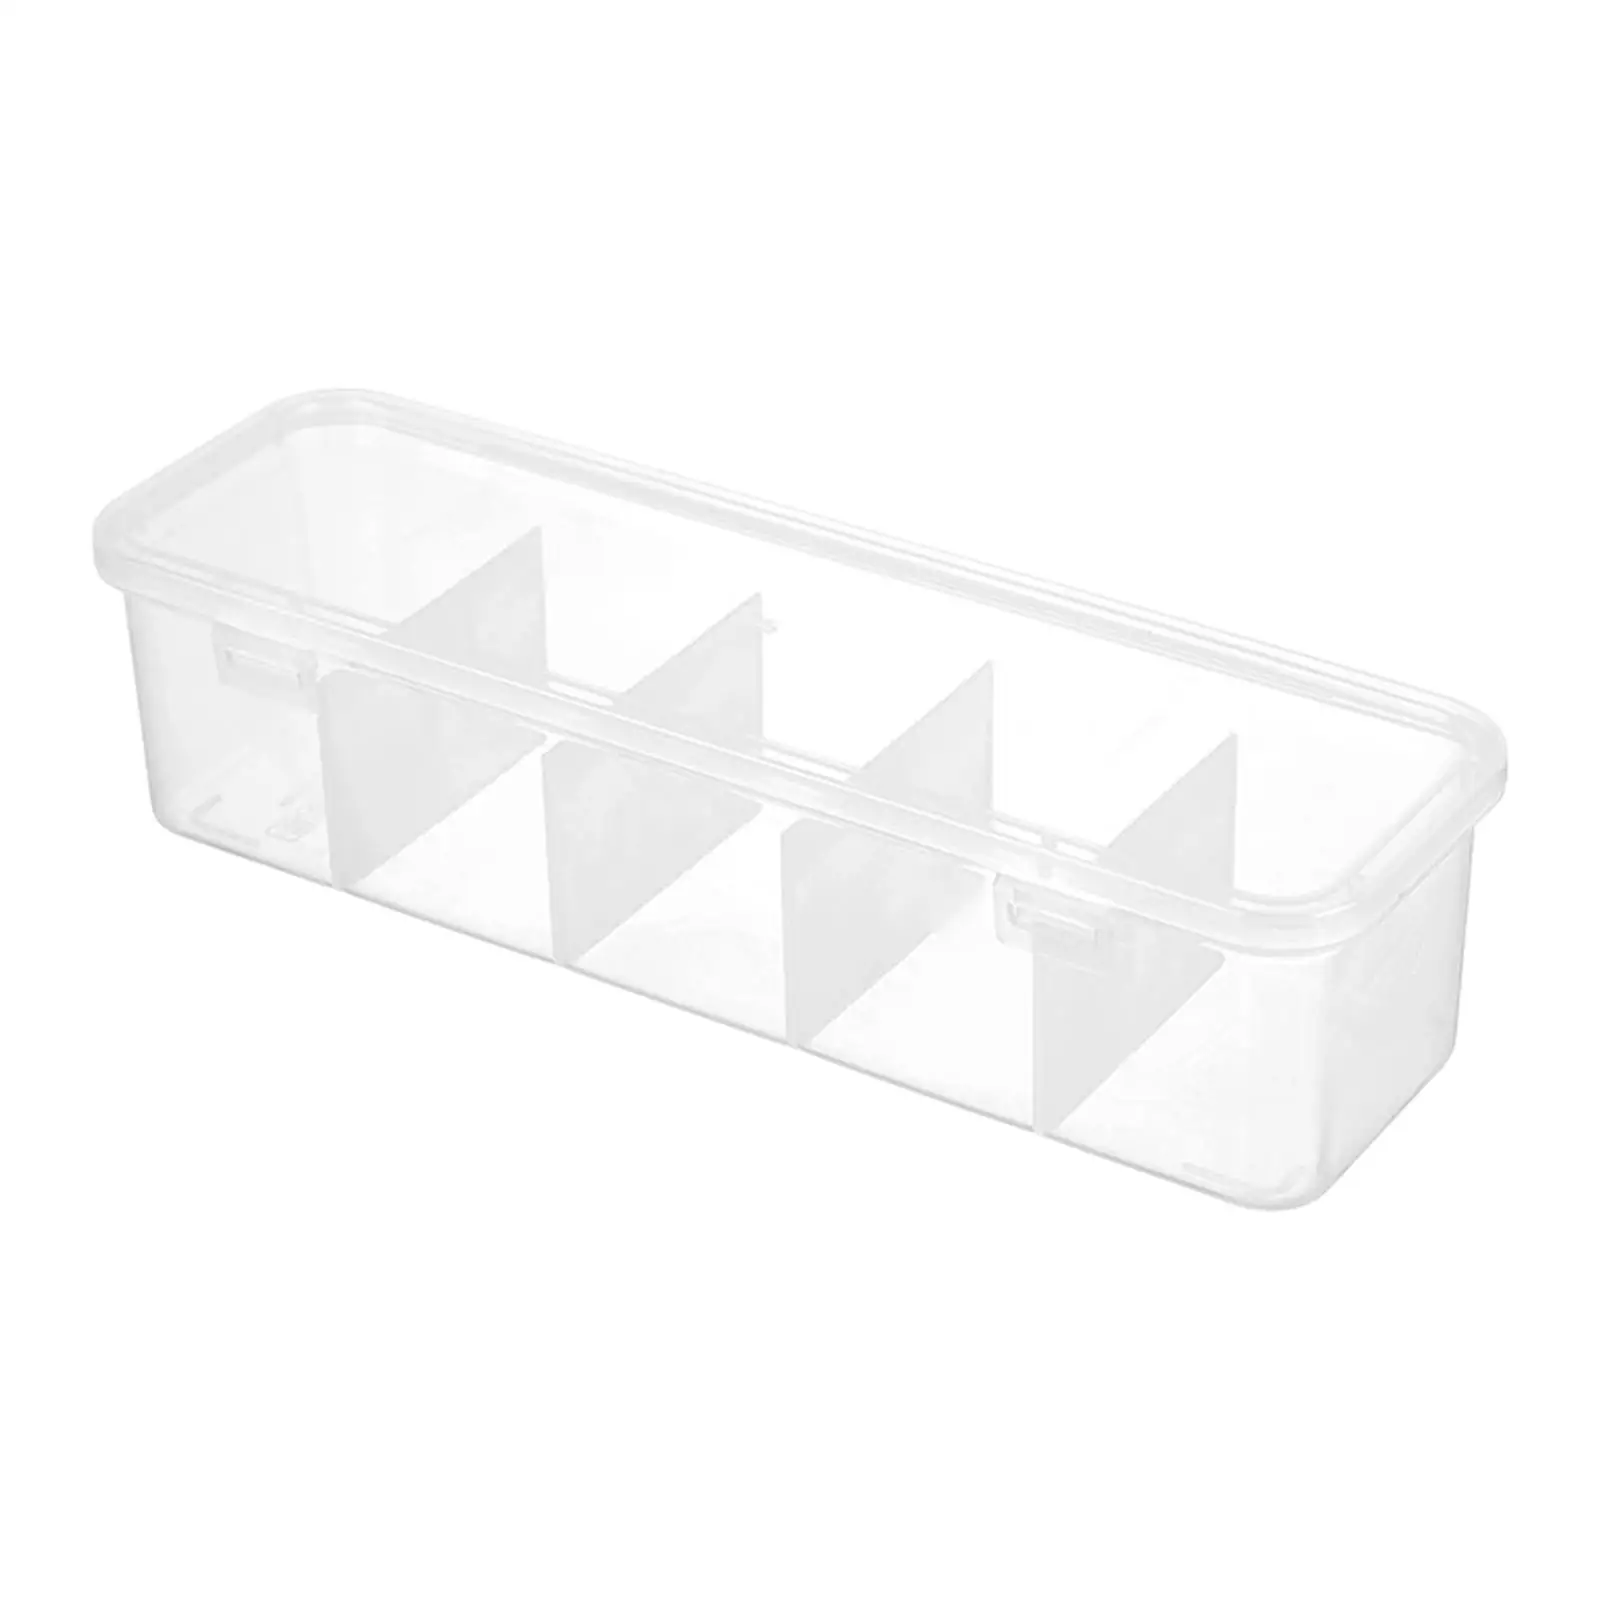 Compartments Organizer Boxes Transparent with Lid Shelf Organization Save Space Multifunction Dividers Sock Underwear Organizer